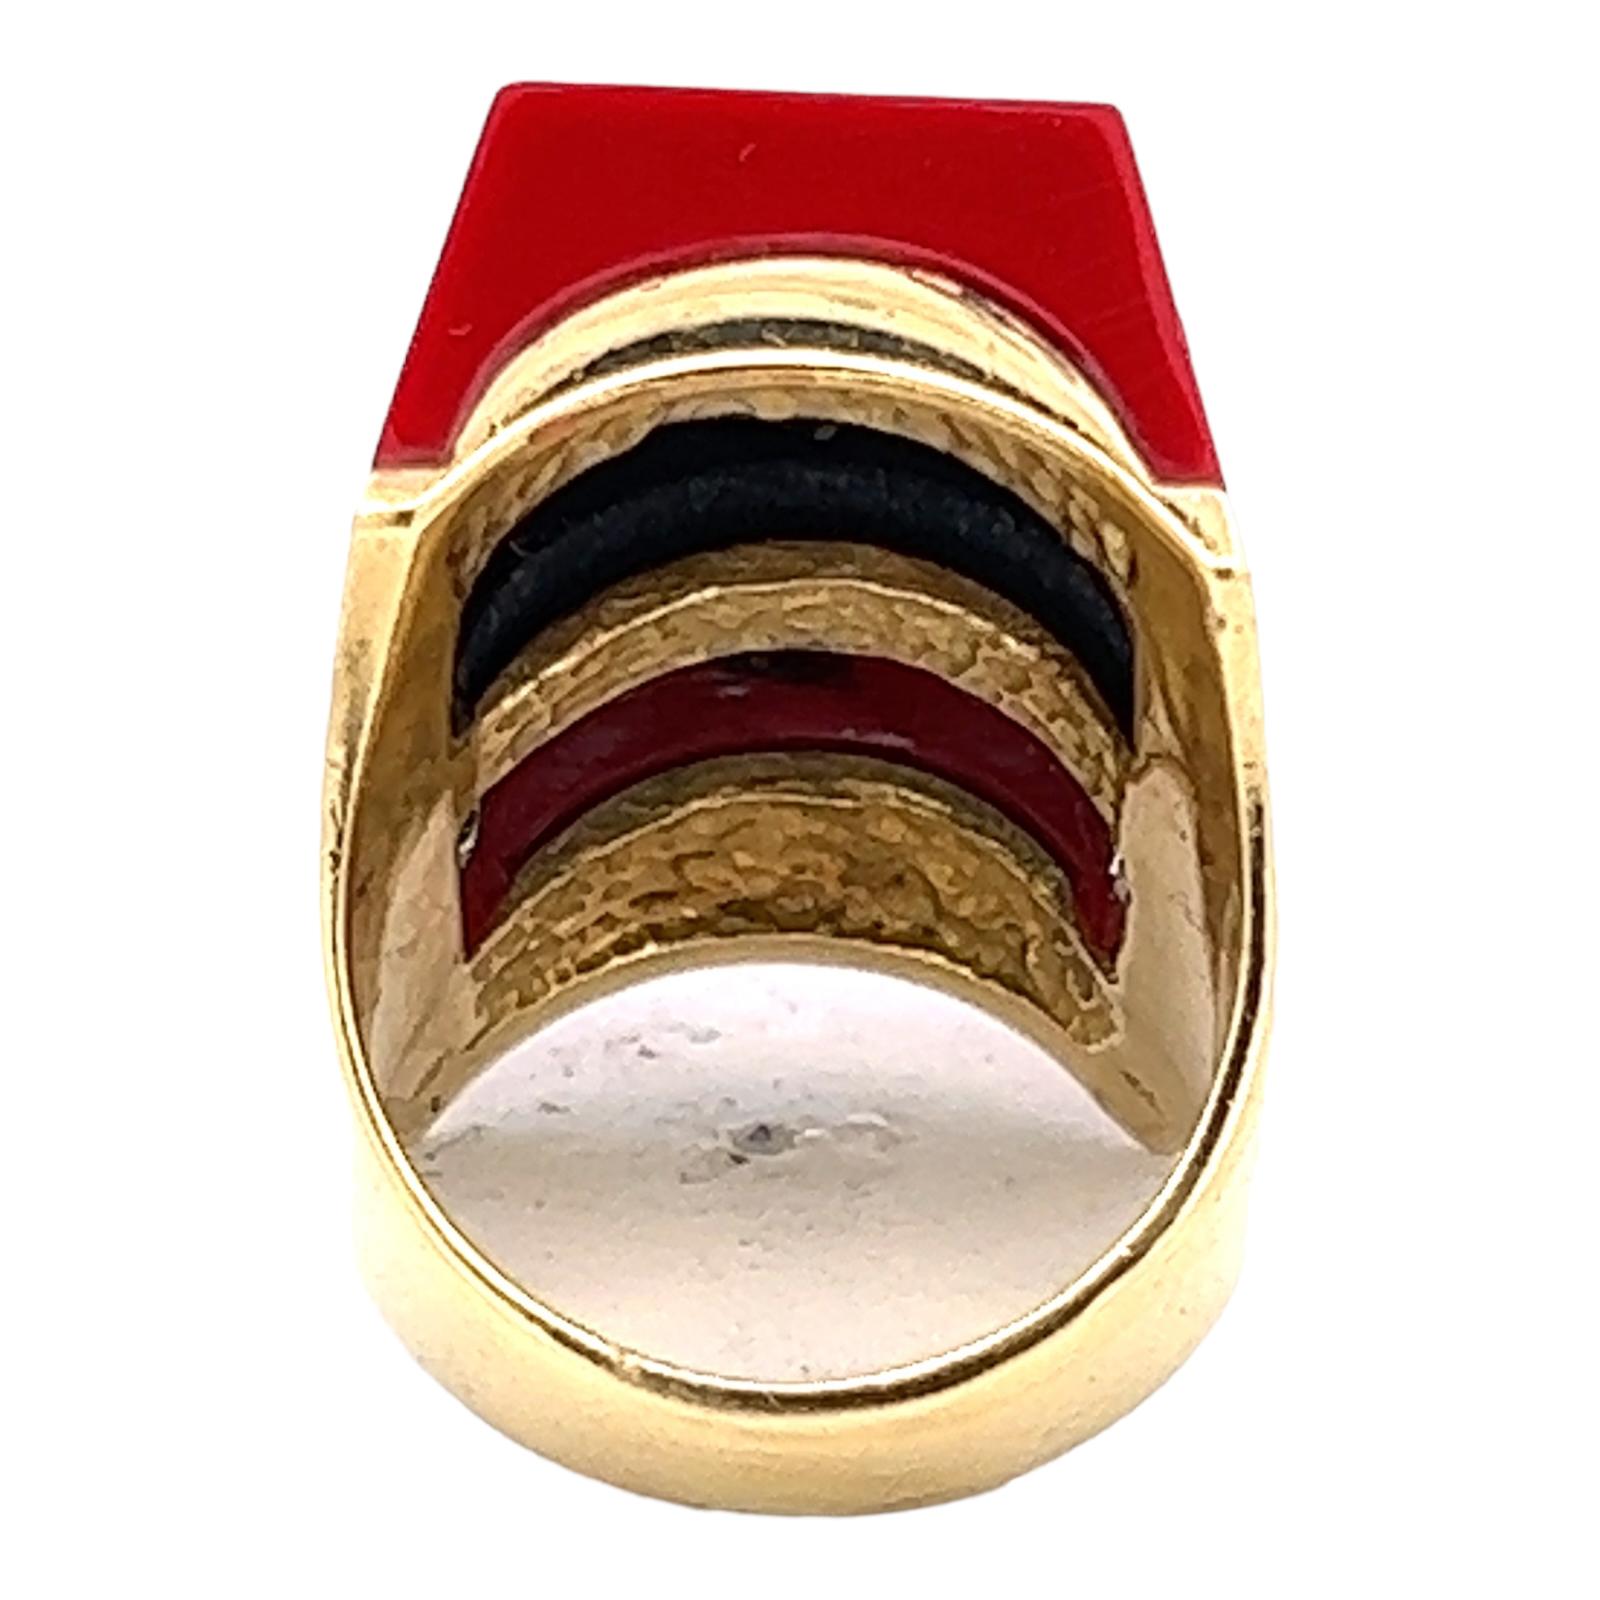 Fabulous diamond, coral, and onyx cocktail ring handcrafted in 18 karat yellow gold. The ring features modern straight cuts of coral and onyx gemstone separated by 20 round brilliant cut diamonds weighing approximately 1.60 CTW and graded G-H color